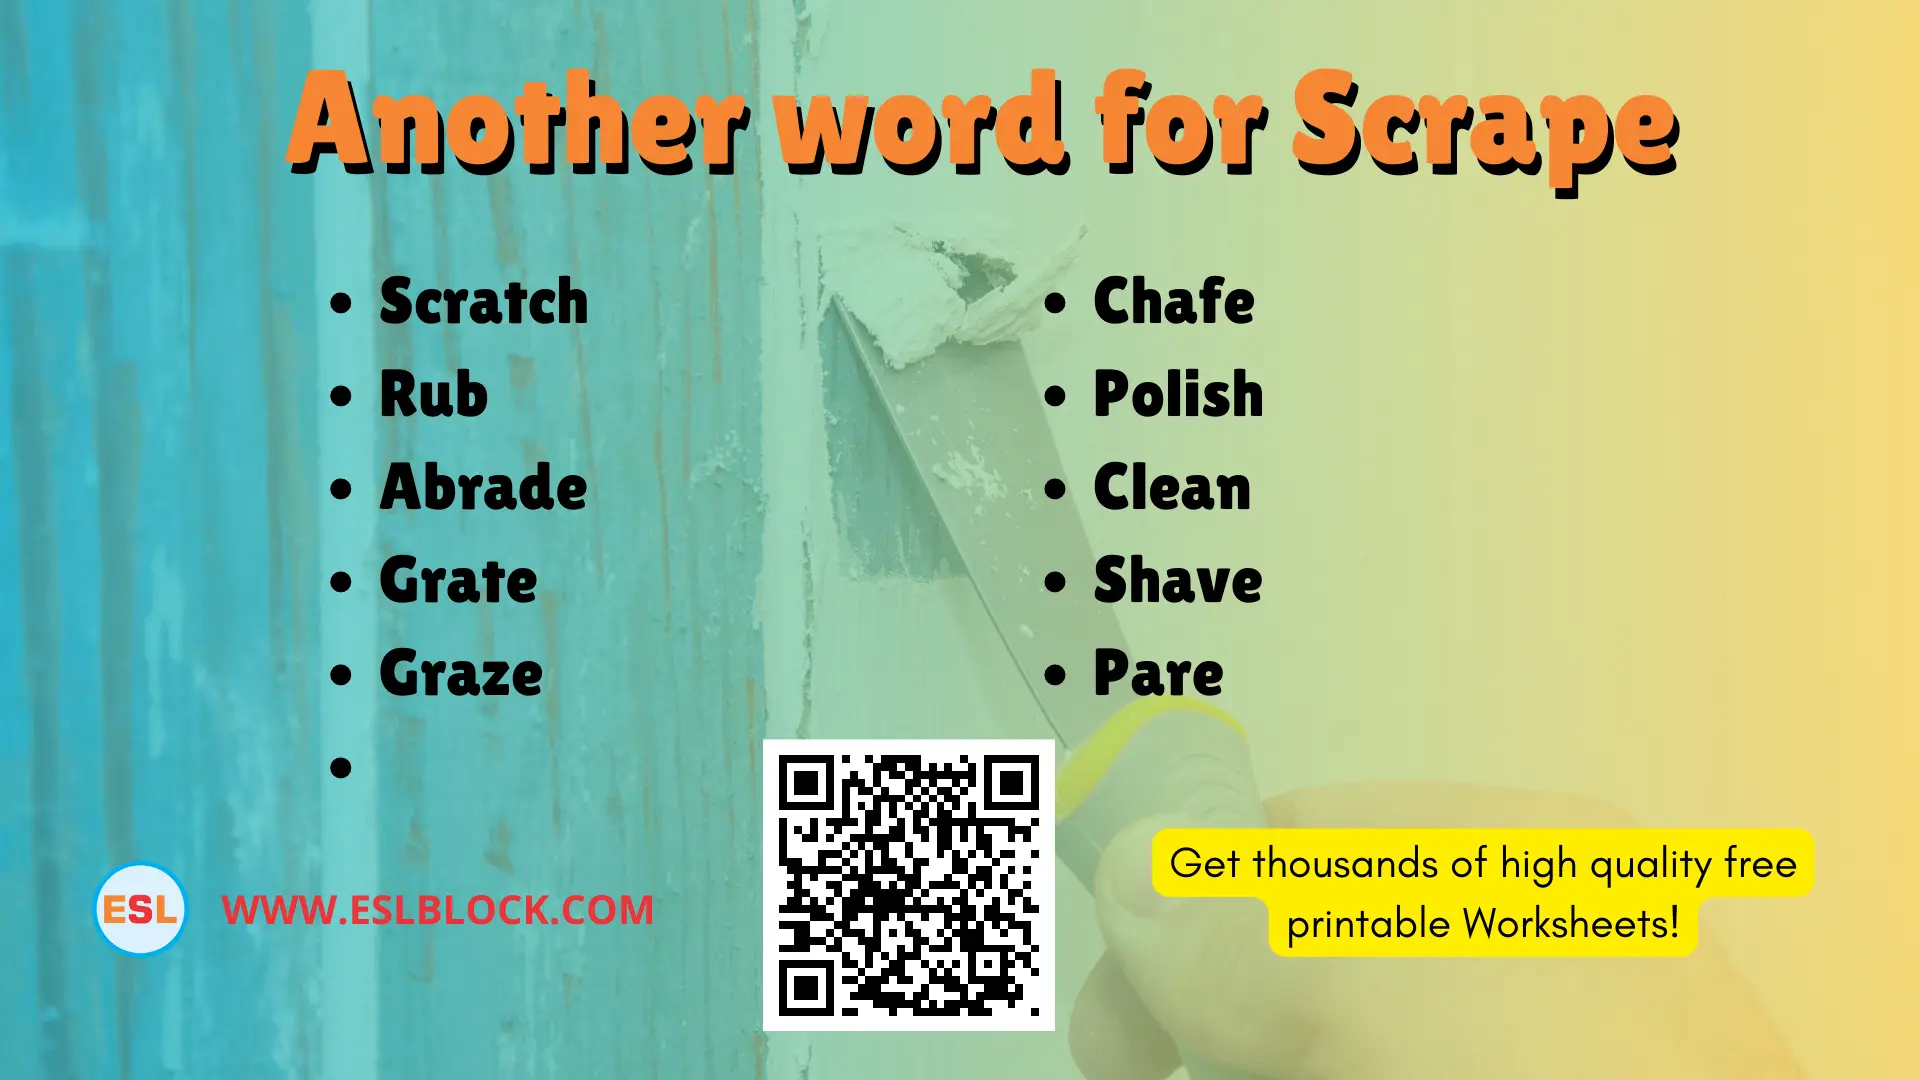 _What is another word for Scrape